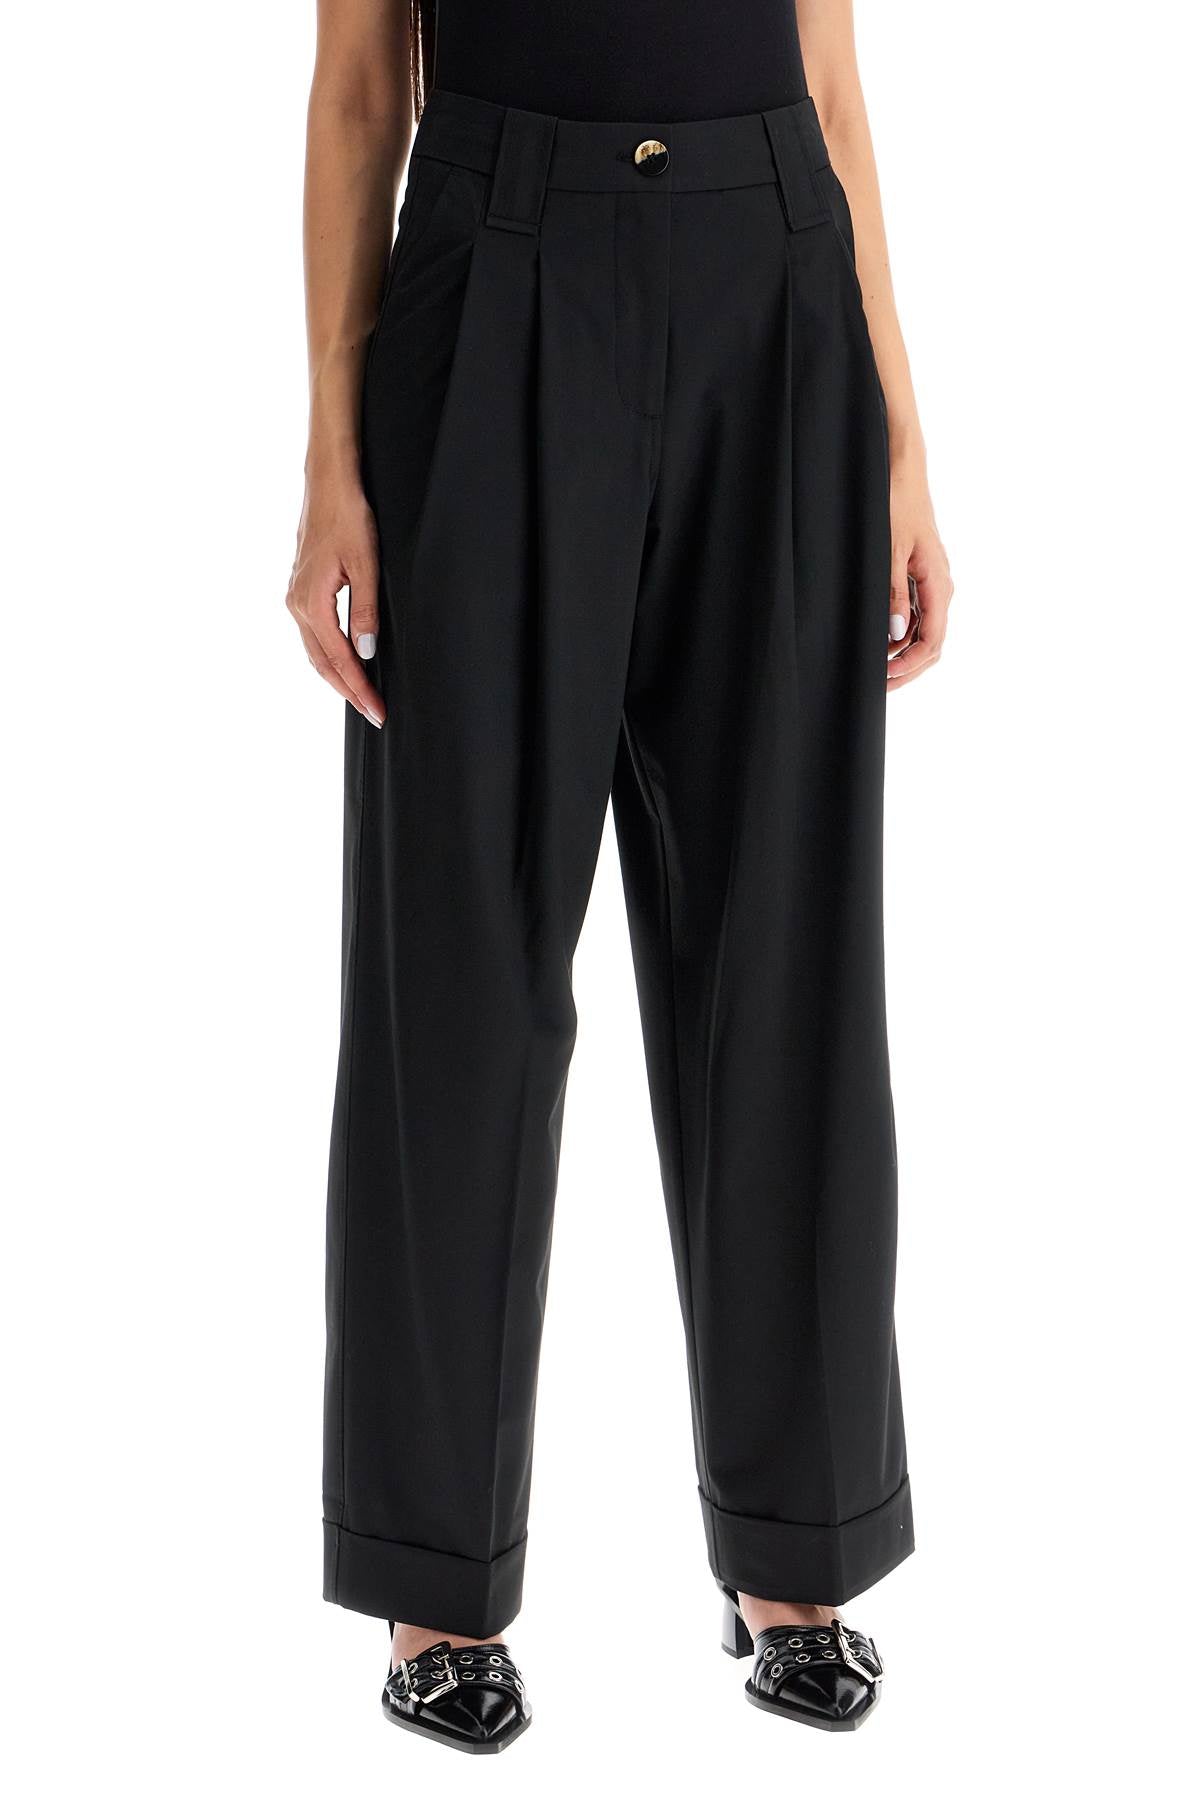 Ganni "flowy trousers with two ple